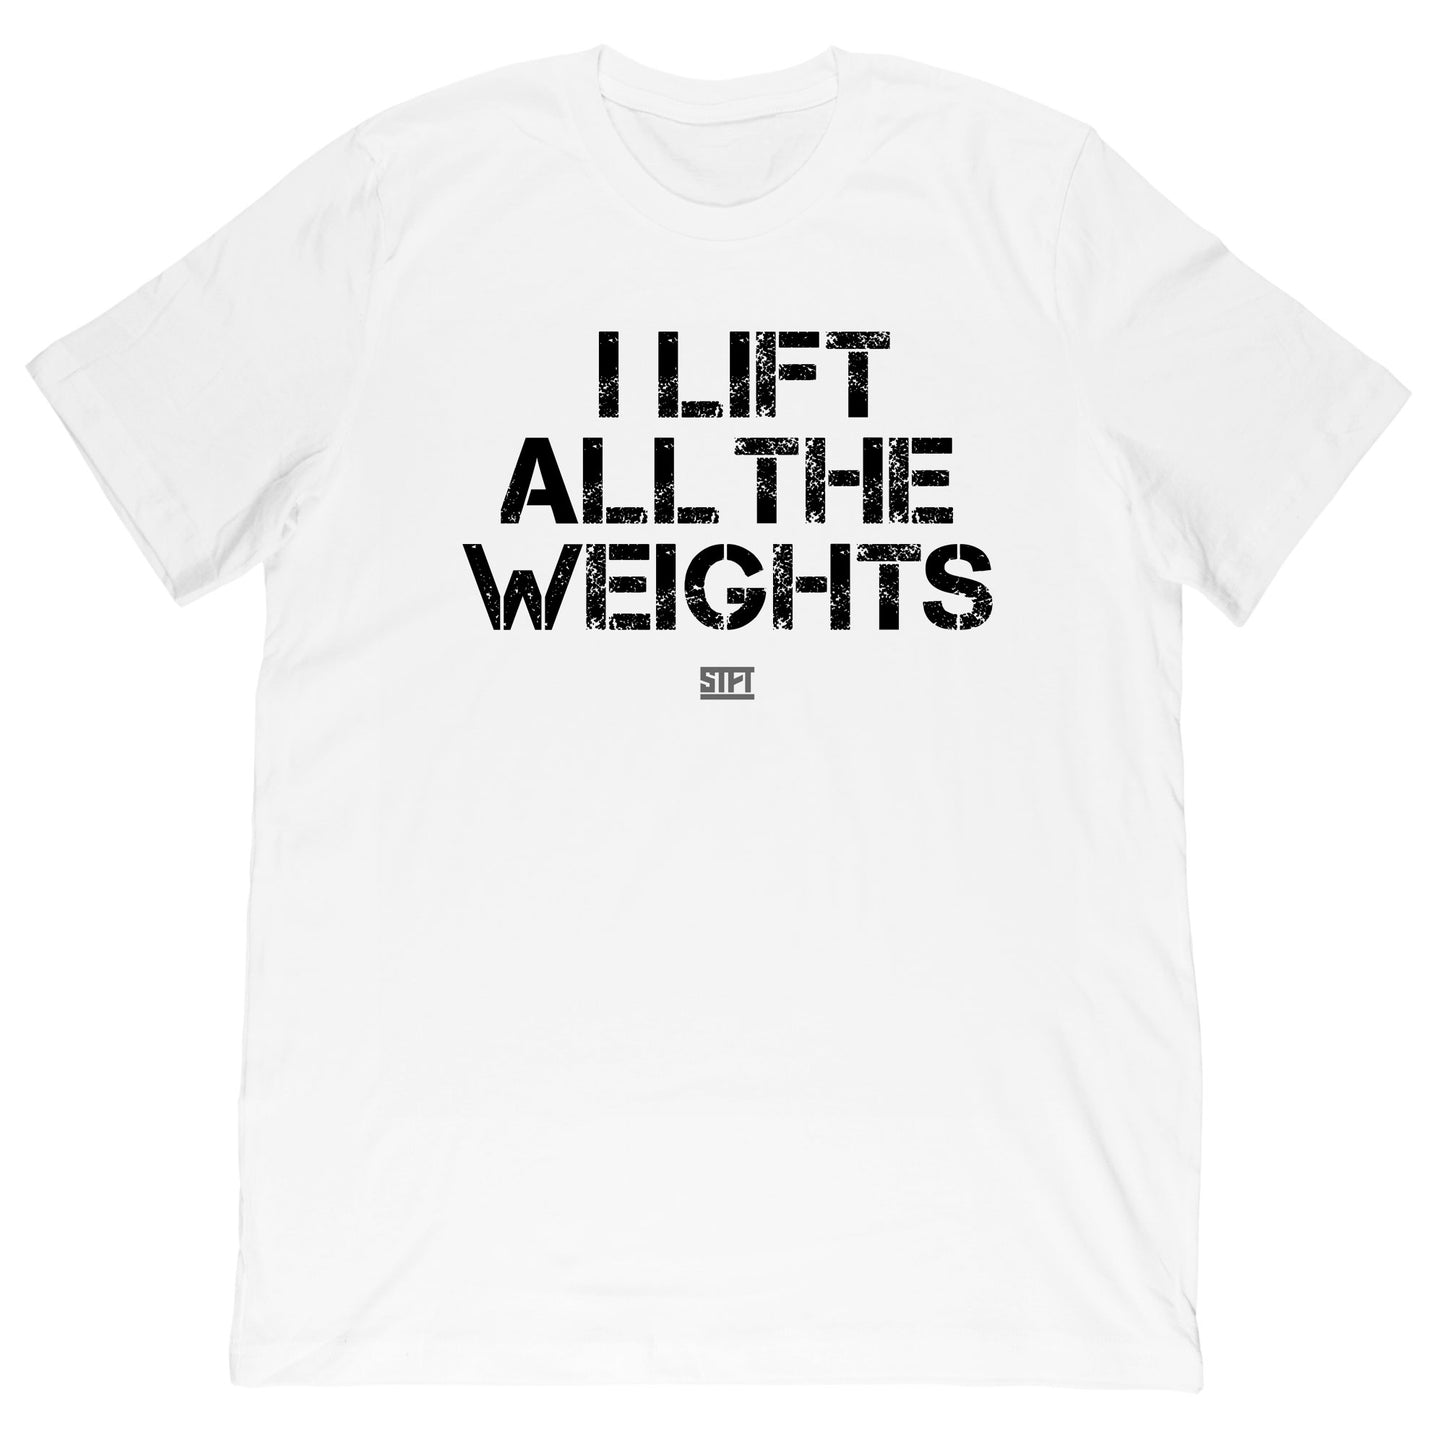 STFT - All The Weights Tee